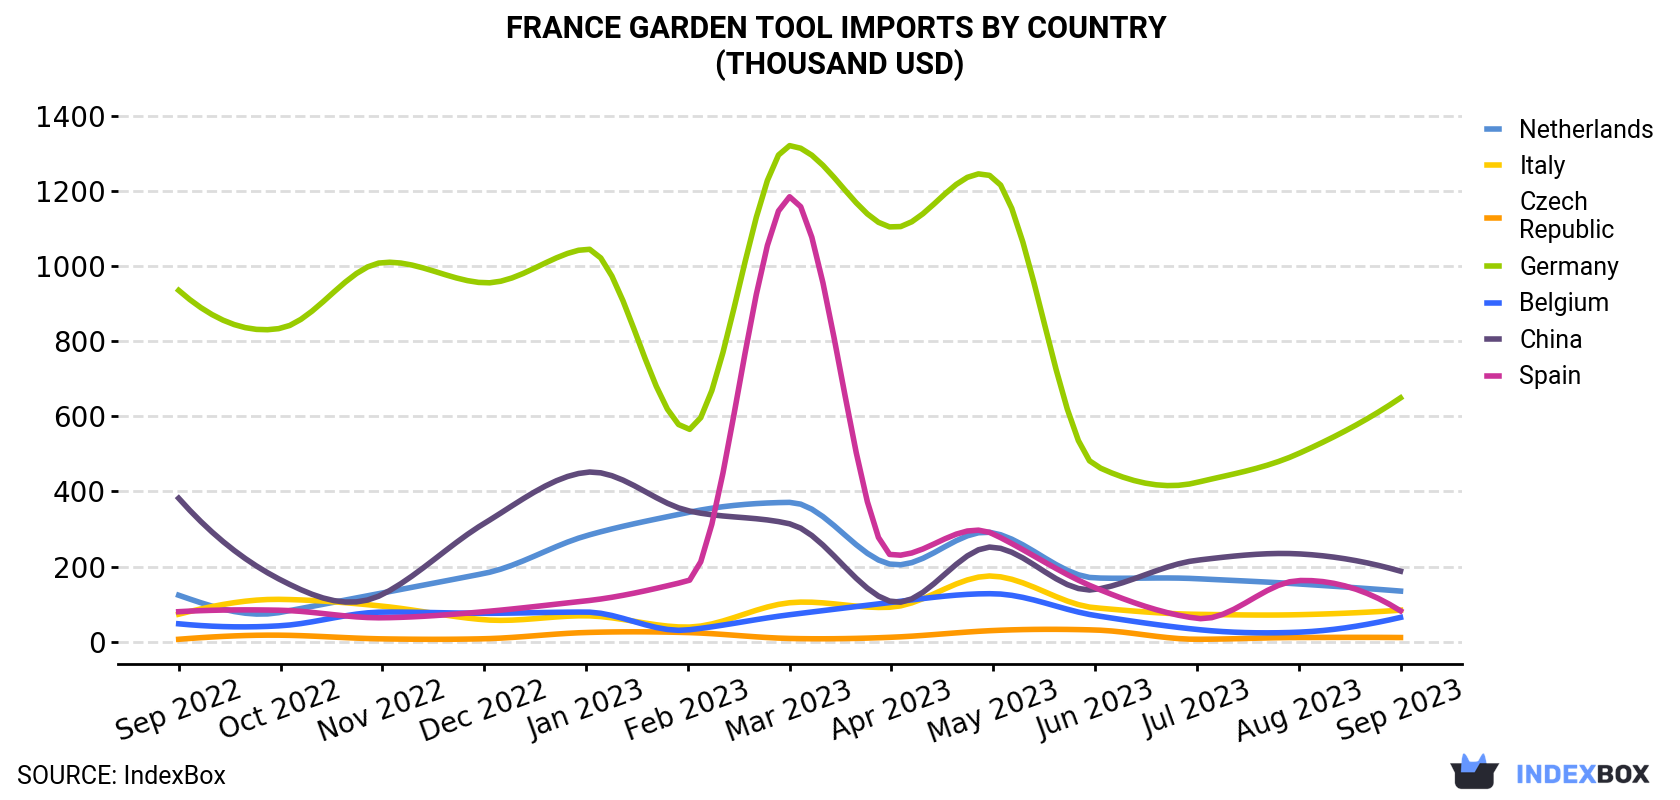 France Garden Tool Imports By Country (Thousand USD)